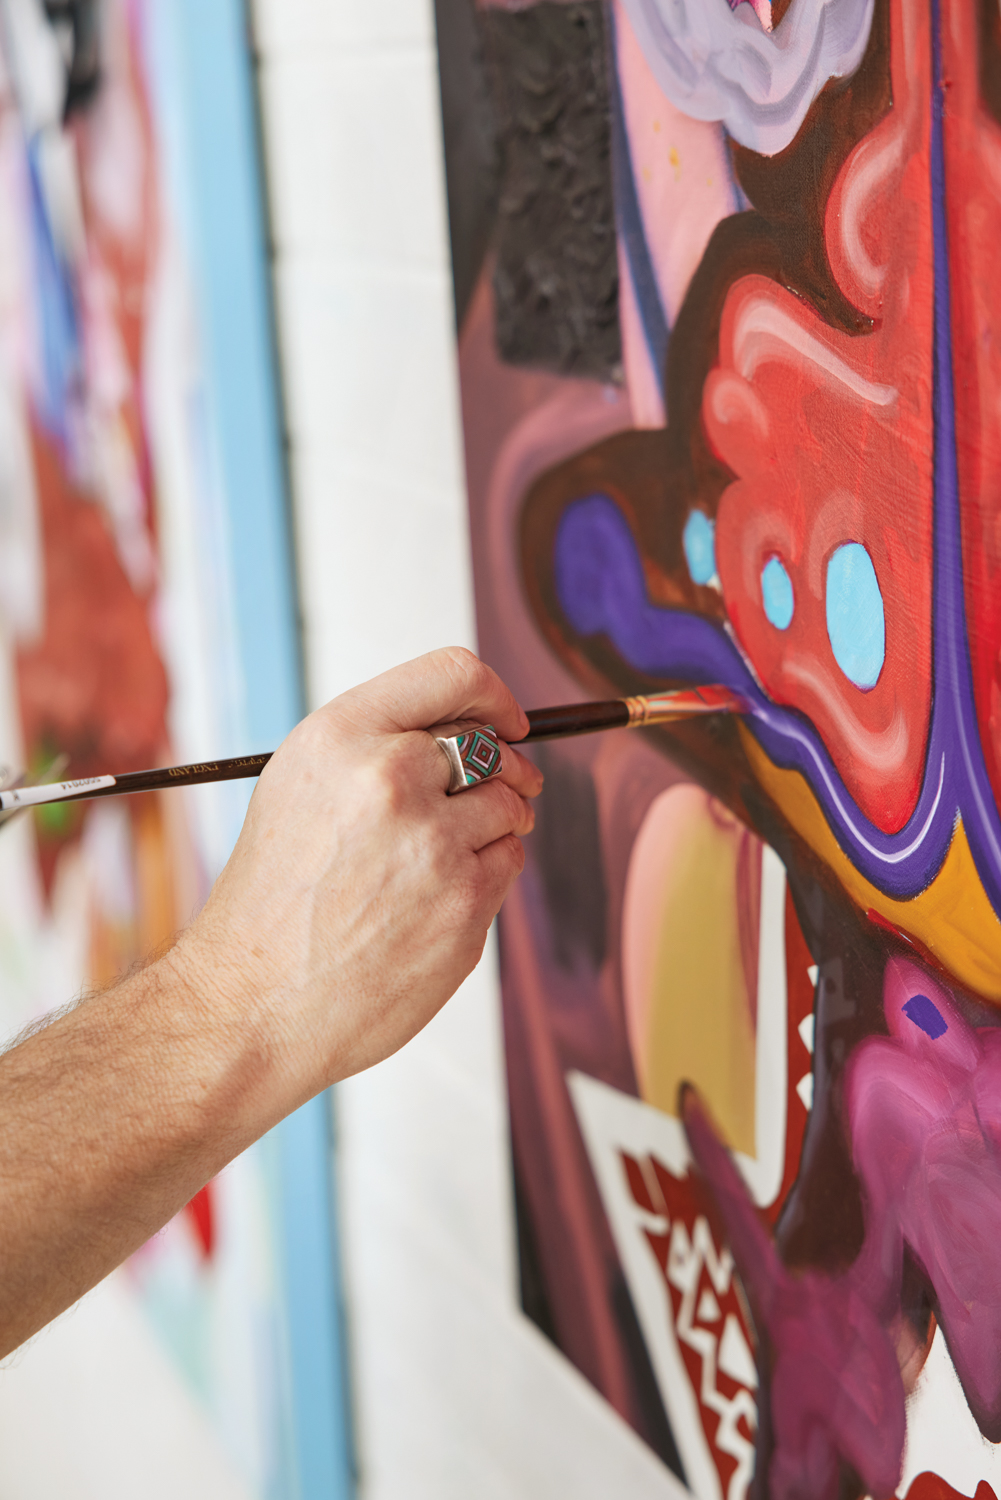 An artist's hand painting a colorful work.